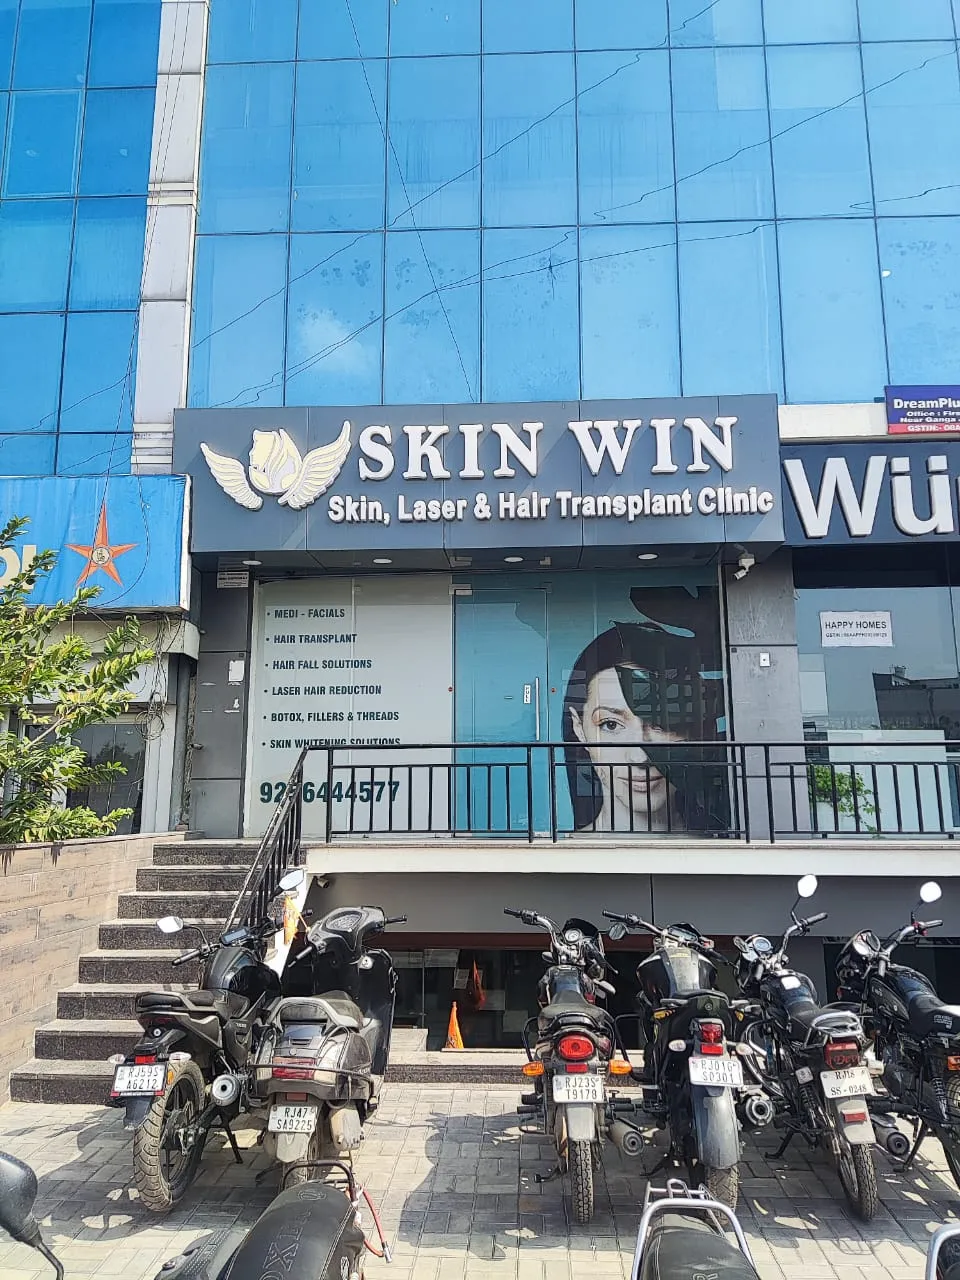 Skin win Clinic Front Image